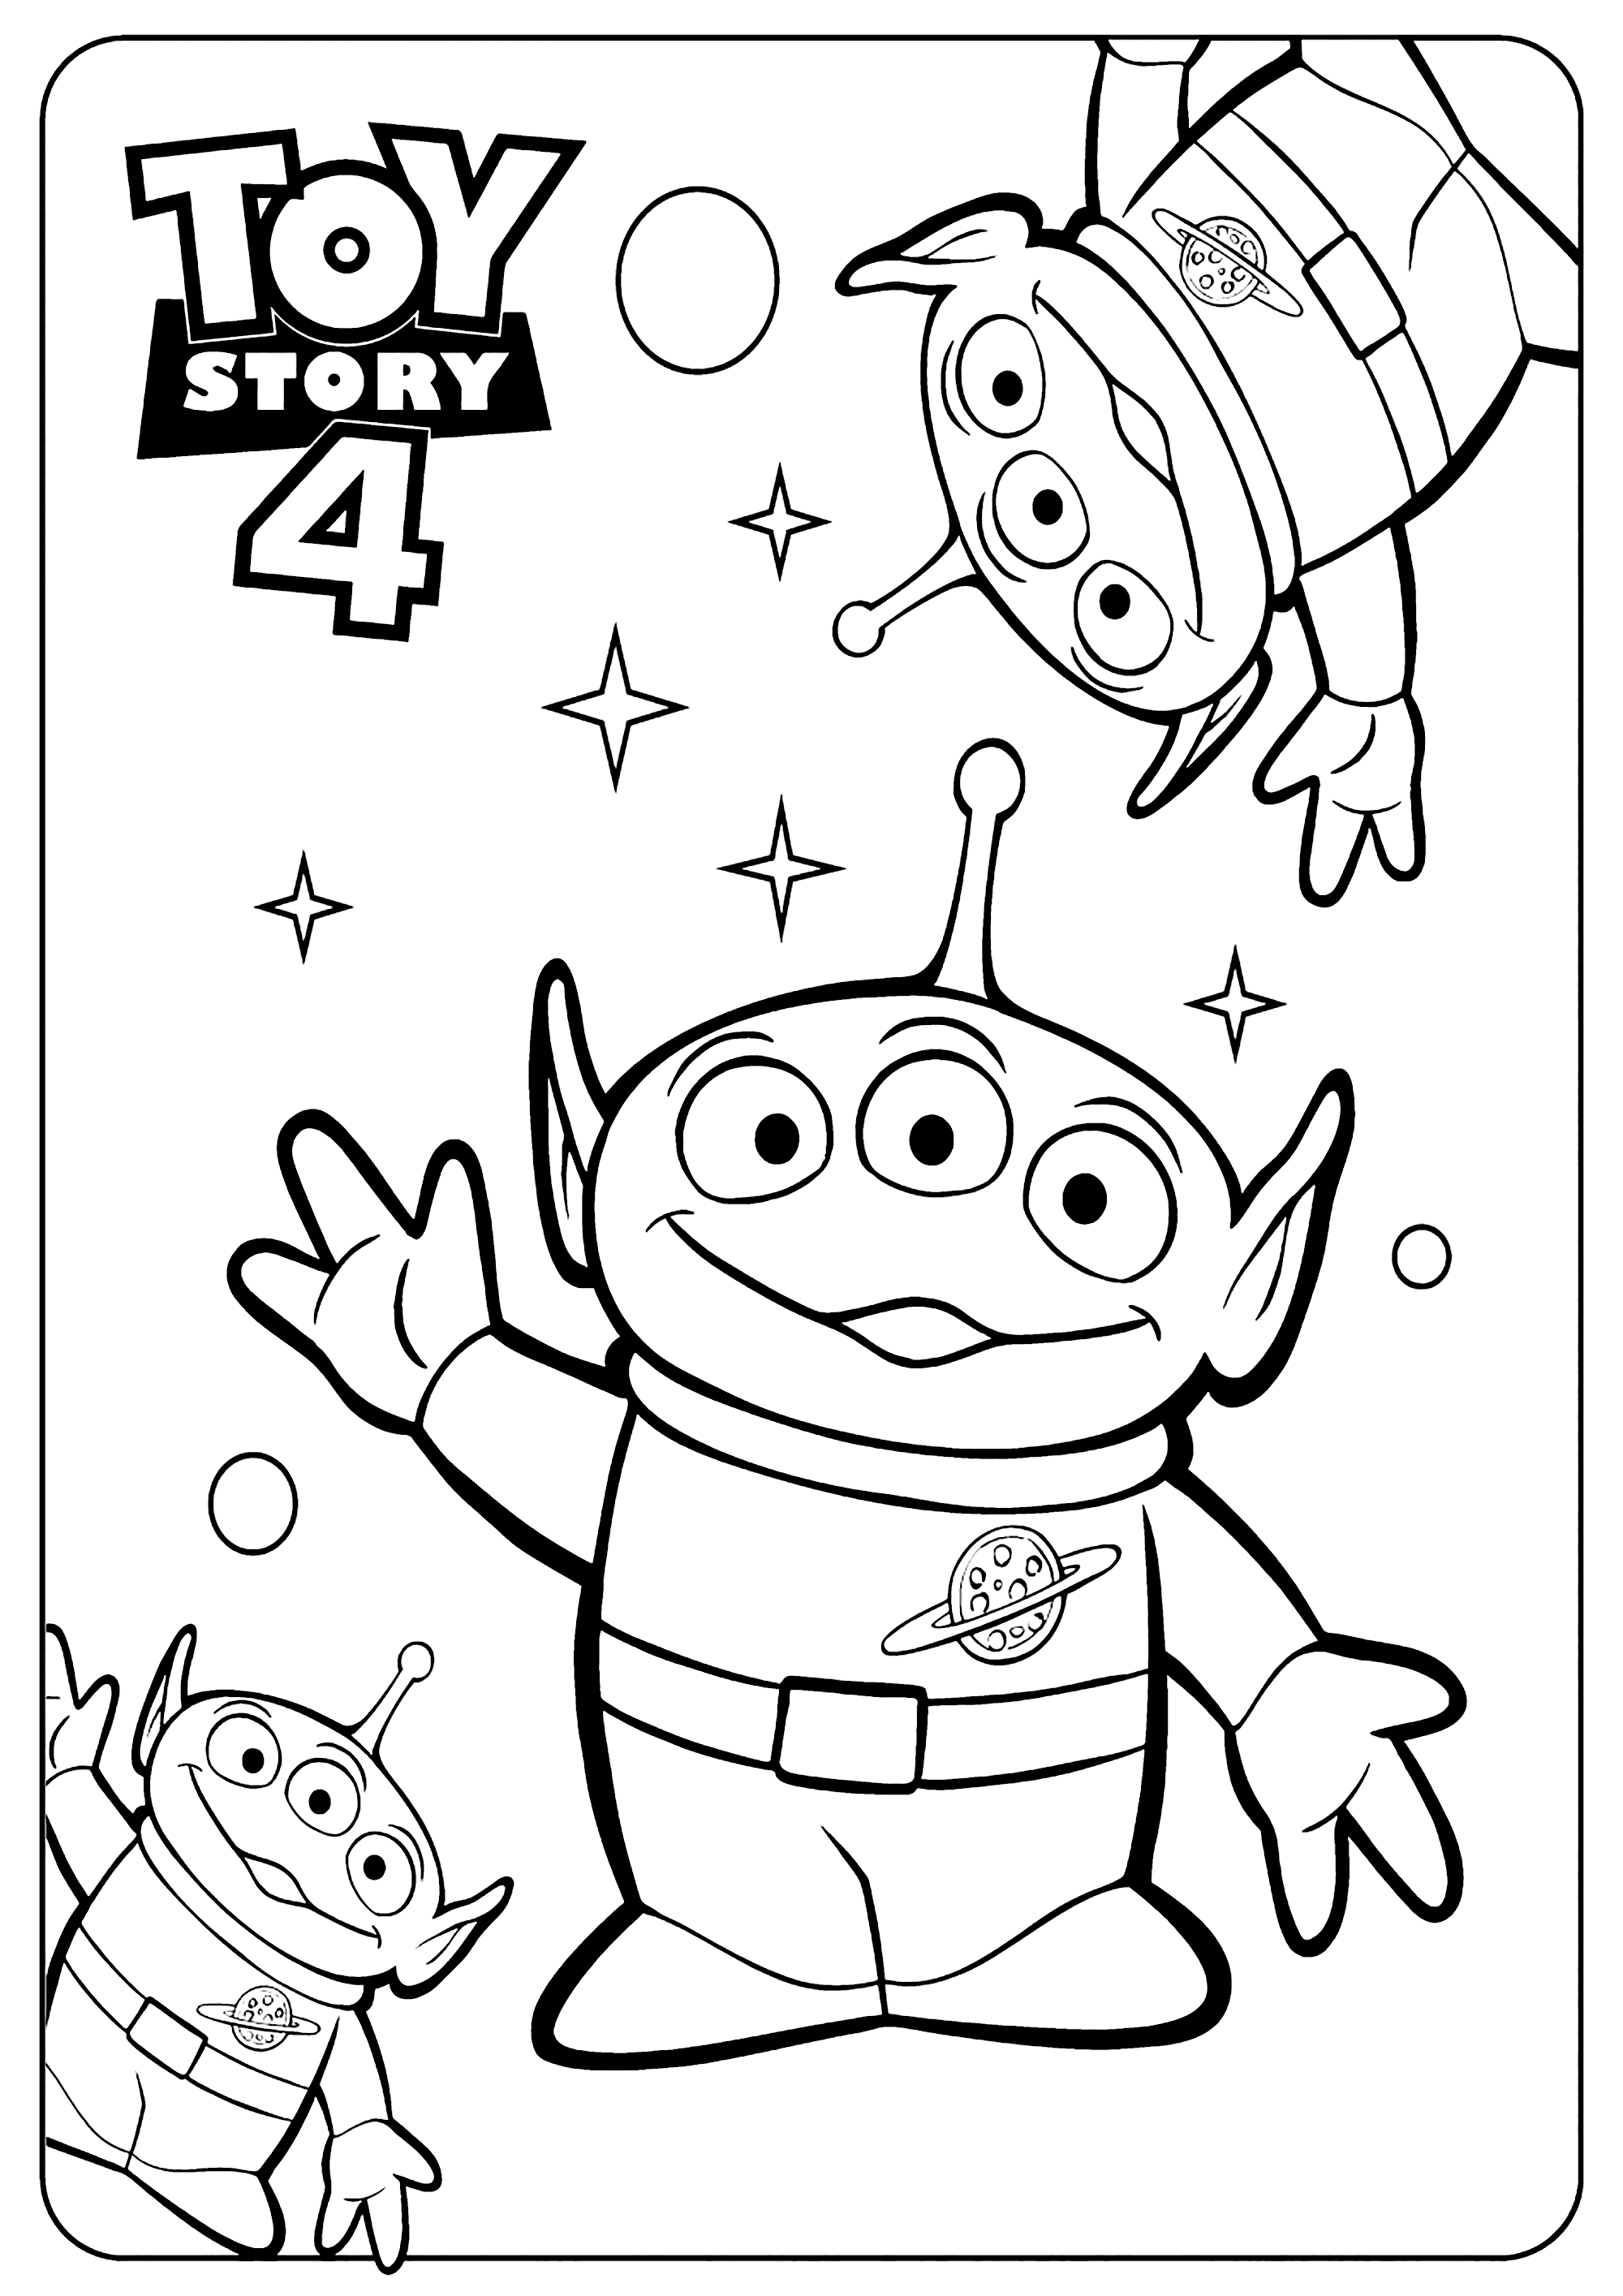 Bo Peep  Toy Story 20 coloring page Disney / Pixar   Toy Story 20 ...